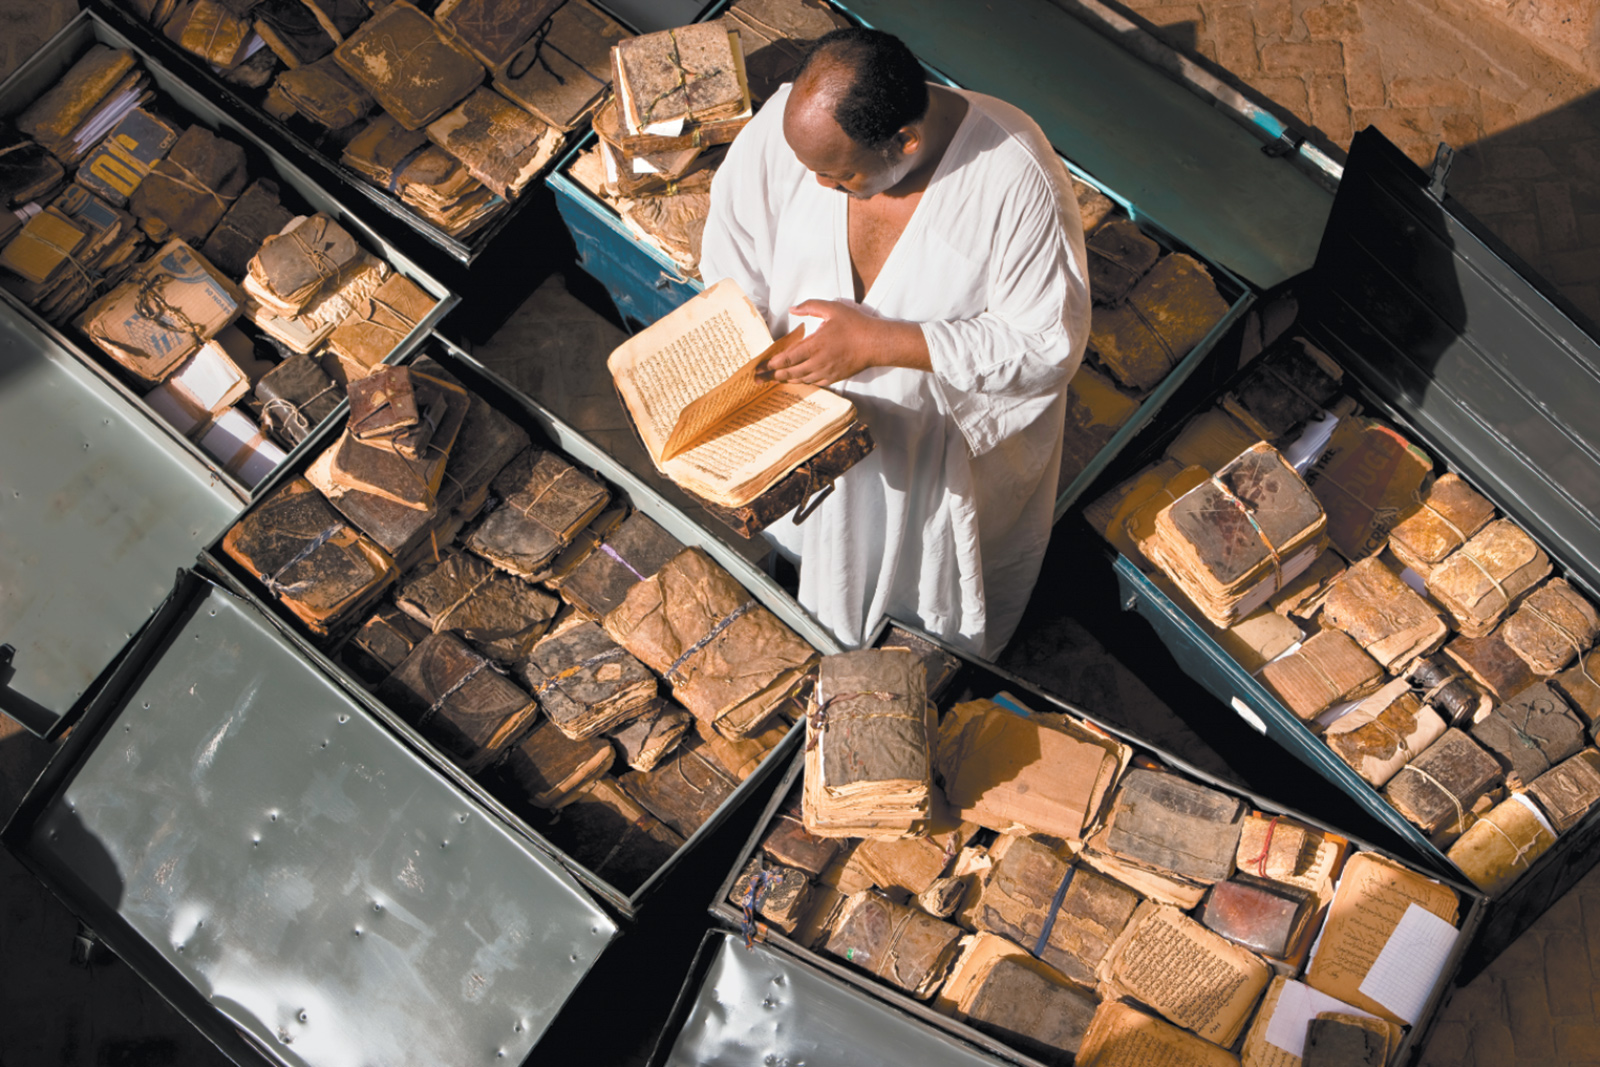 Abdel Kader Haidara in Timbuktu with ancient manuscripts from Mali, Niger, Ethiopia, Sudan, and Nigeria, September 2009. Haider was instrumental in saving the manuscripts during the militant Islamist takeover of Timbuktu in 2012.